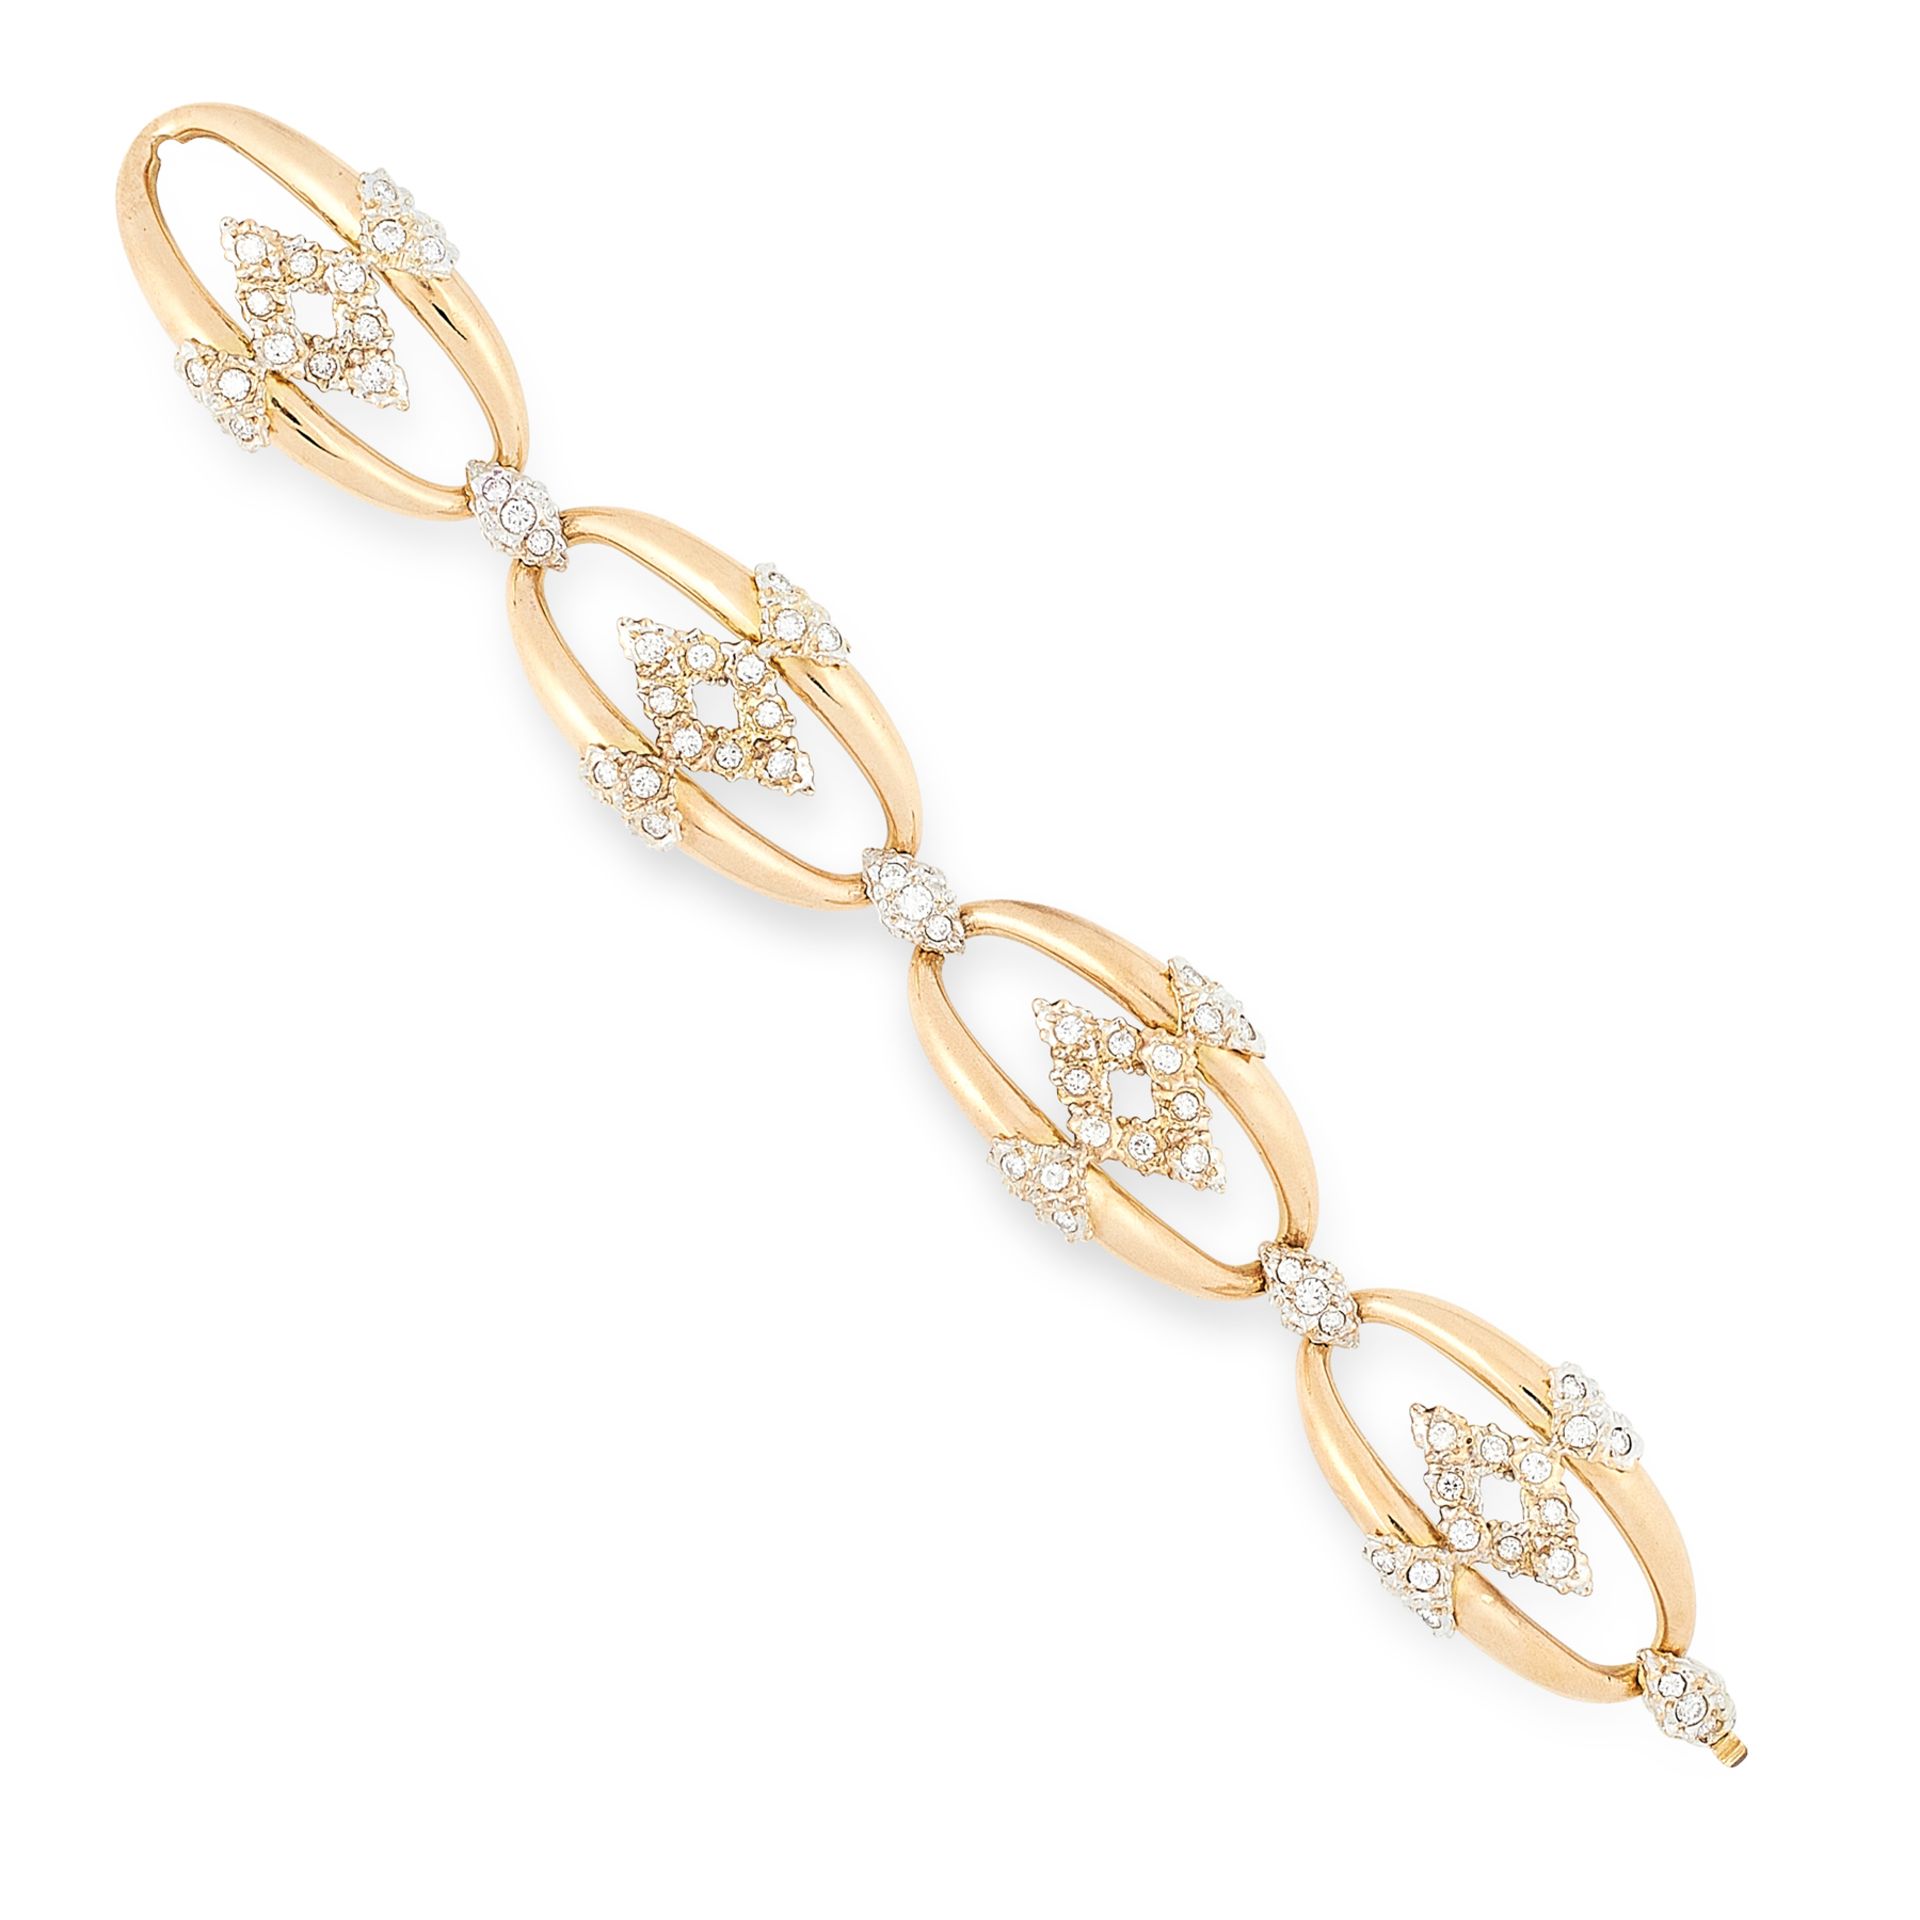 A DIAMOND BRACELET in 18ct yellow gold, comprising four oval links set with round cut diamonds